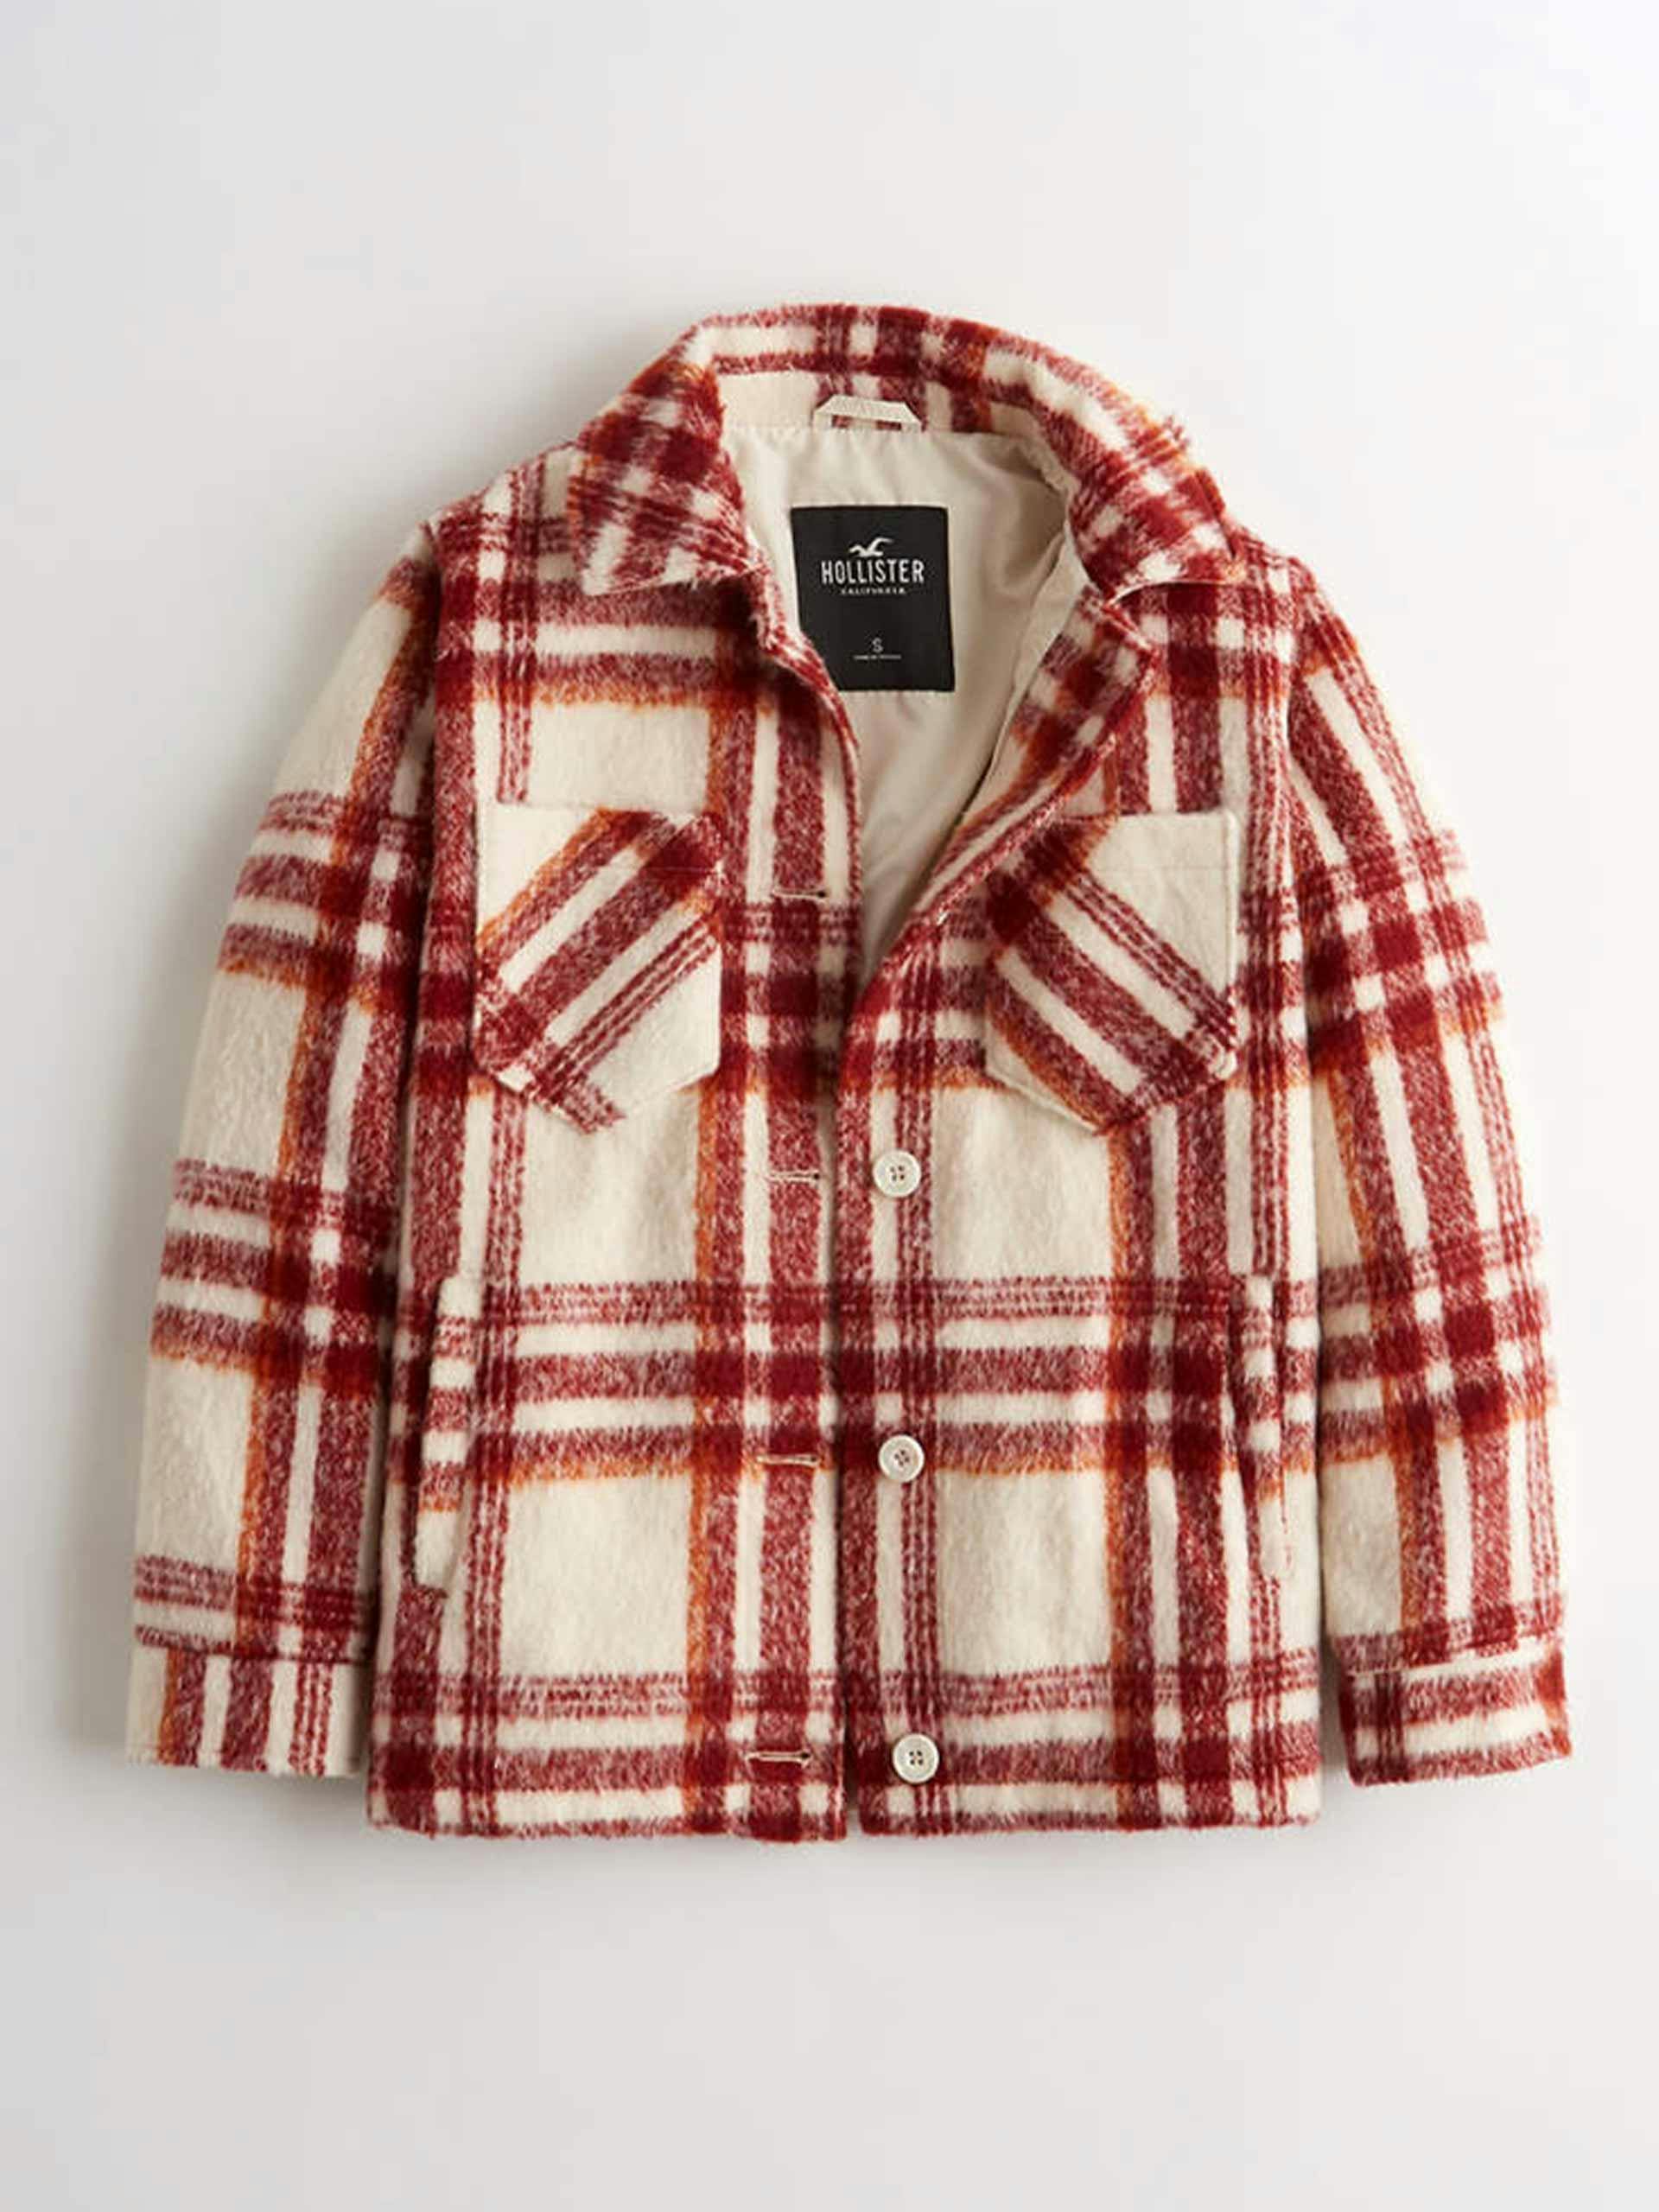 Red and white checked jacket